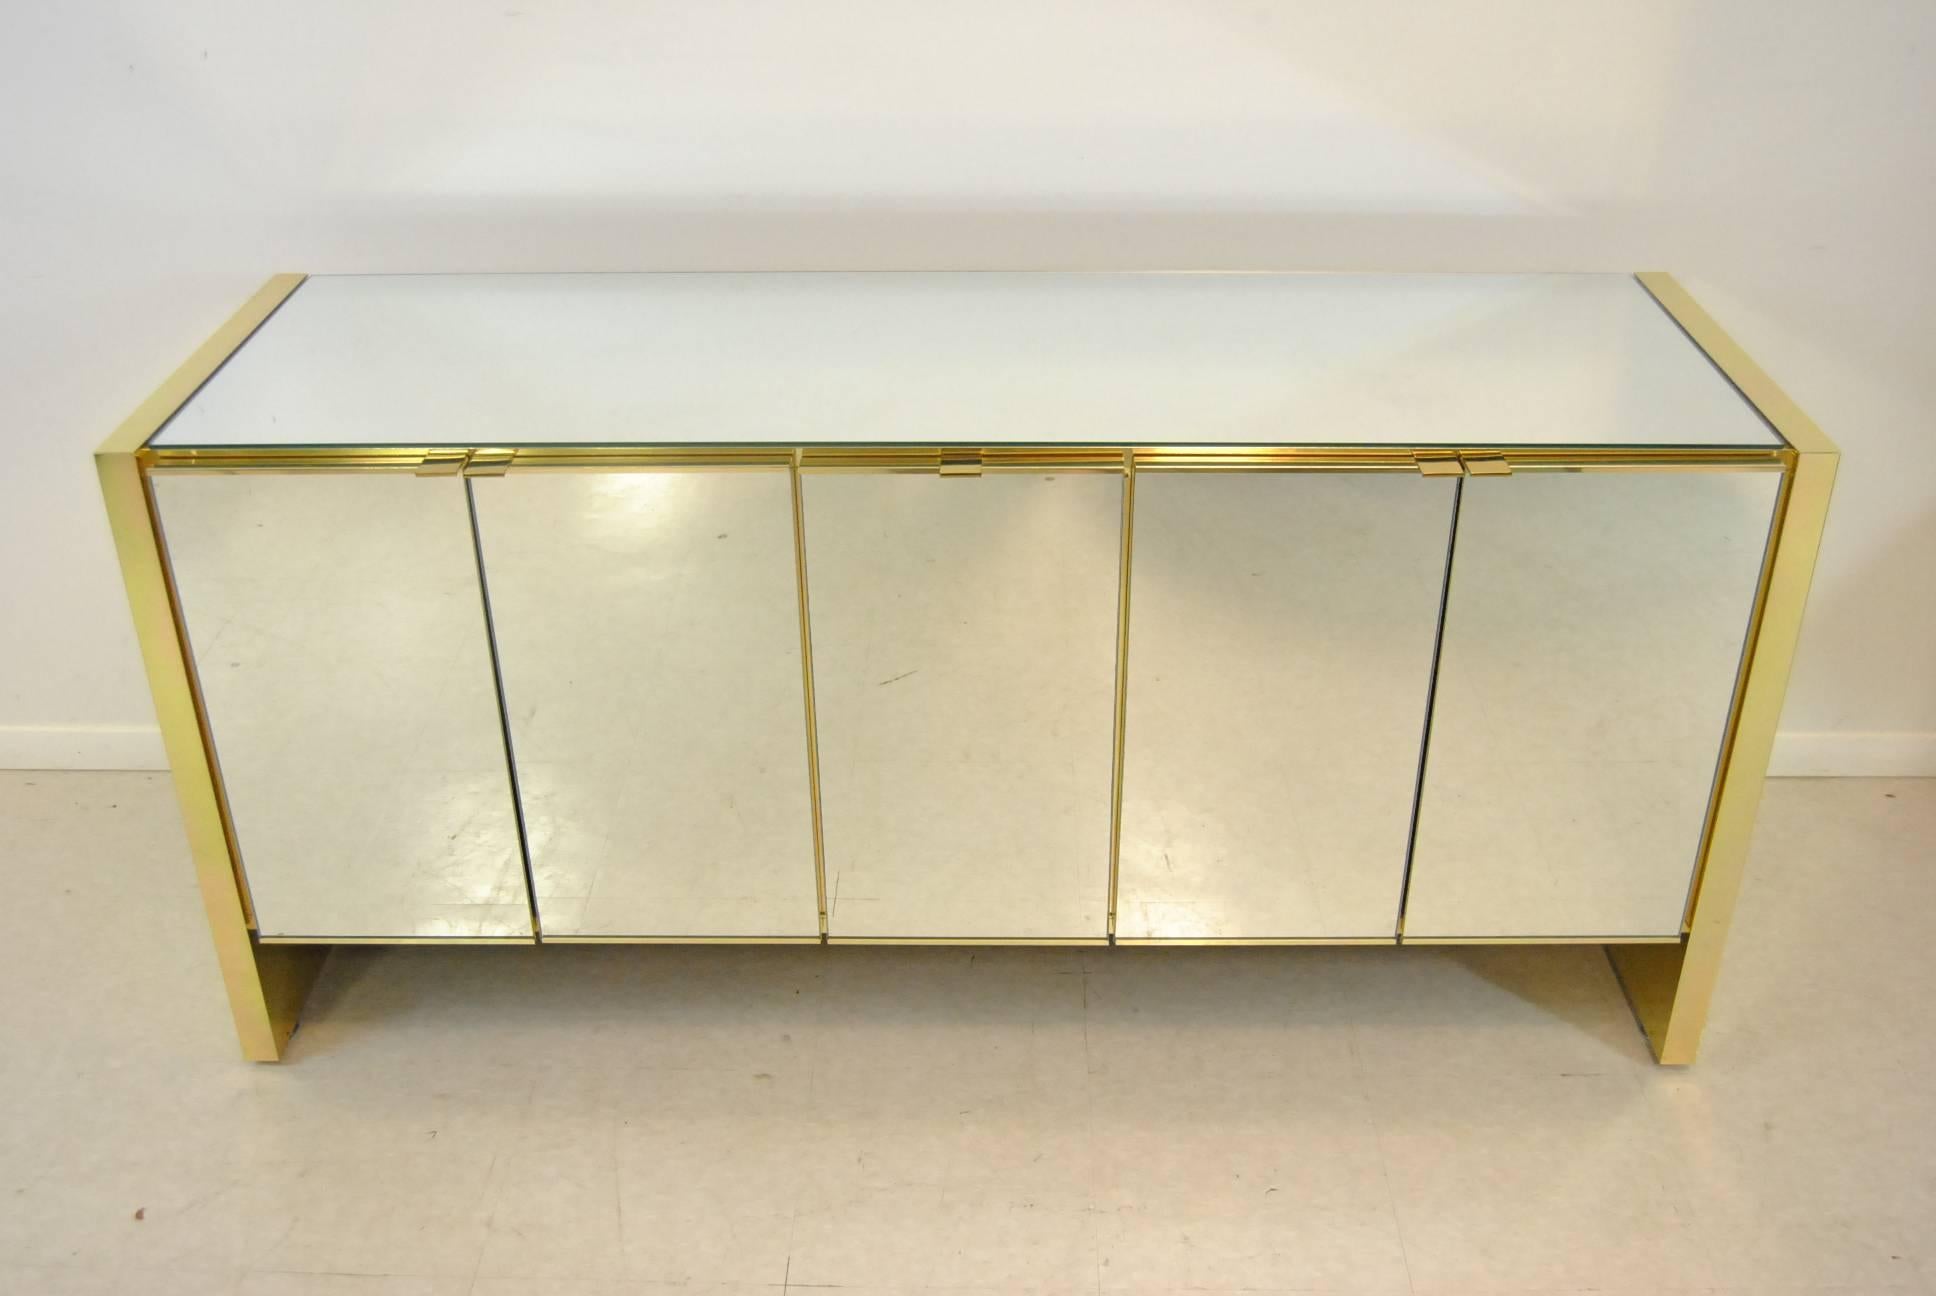 A fabulous Mid-Century Modern credenza by Ello. It features a mirrored top and mirrored doors with brass supports and adjustable shelves. Very good condition with one small ding on the top right rear brass edge and a few light scratches on top.